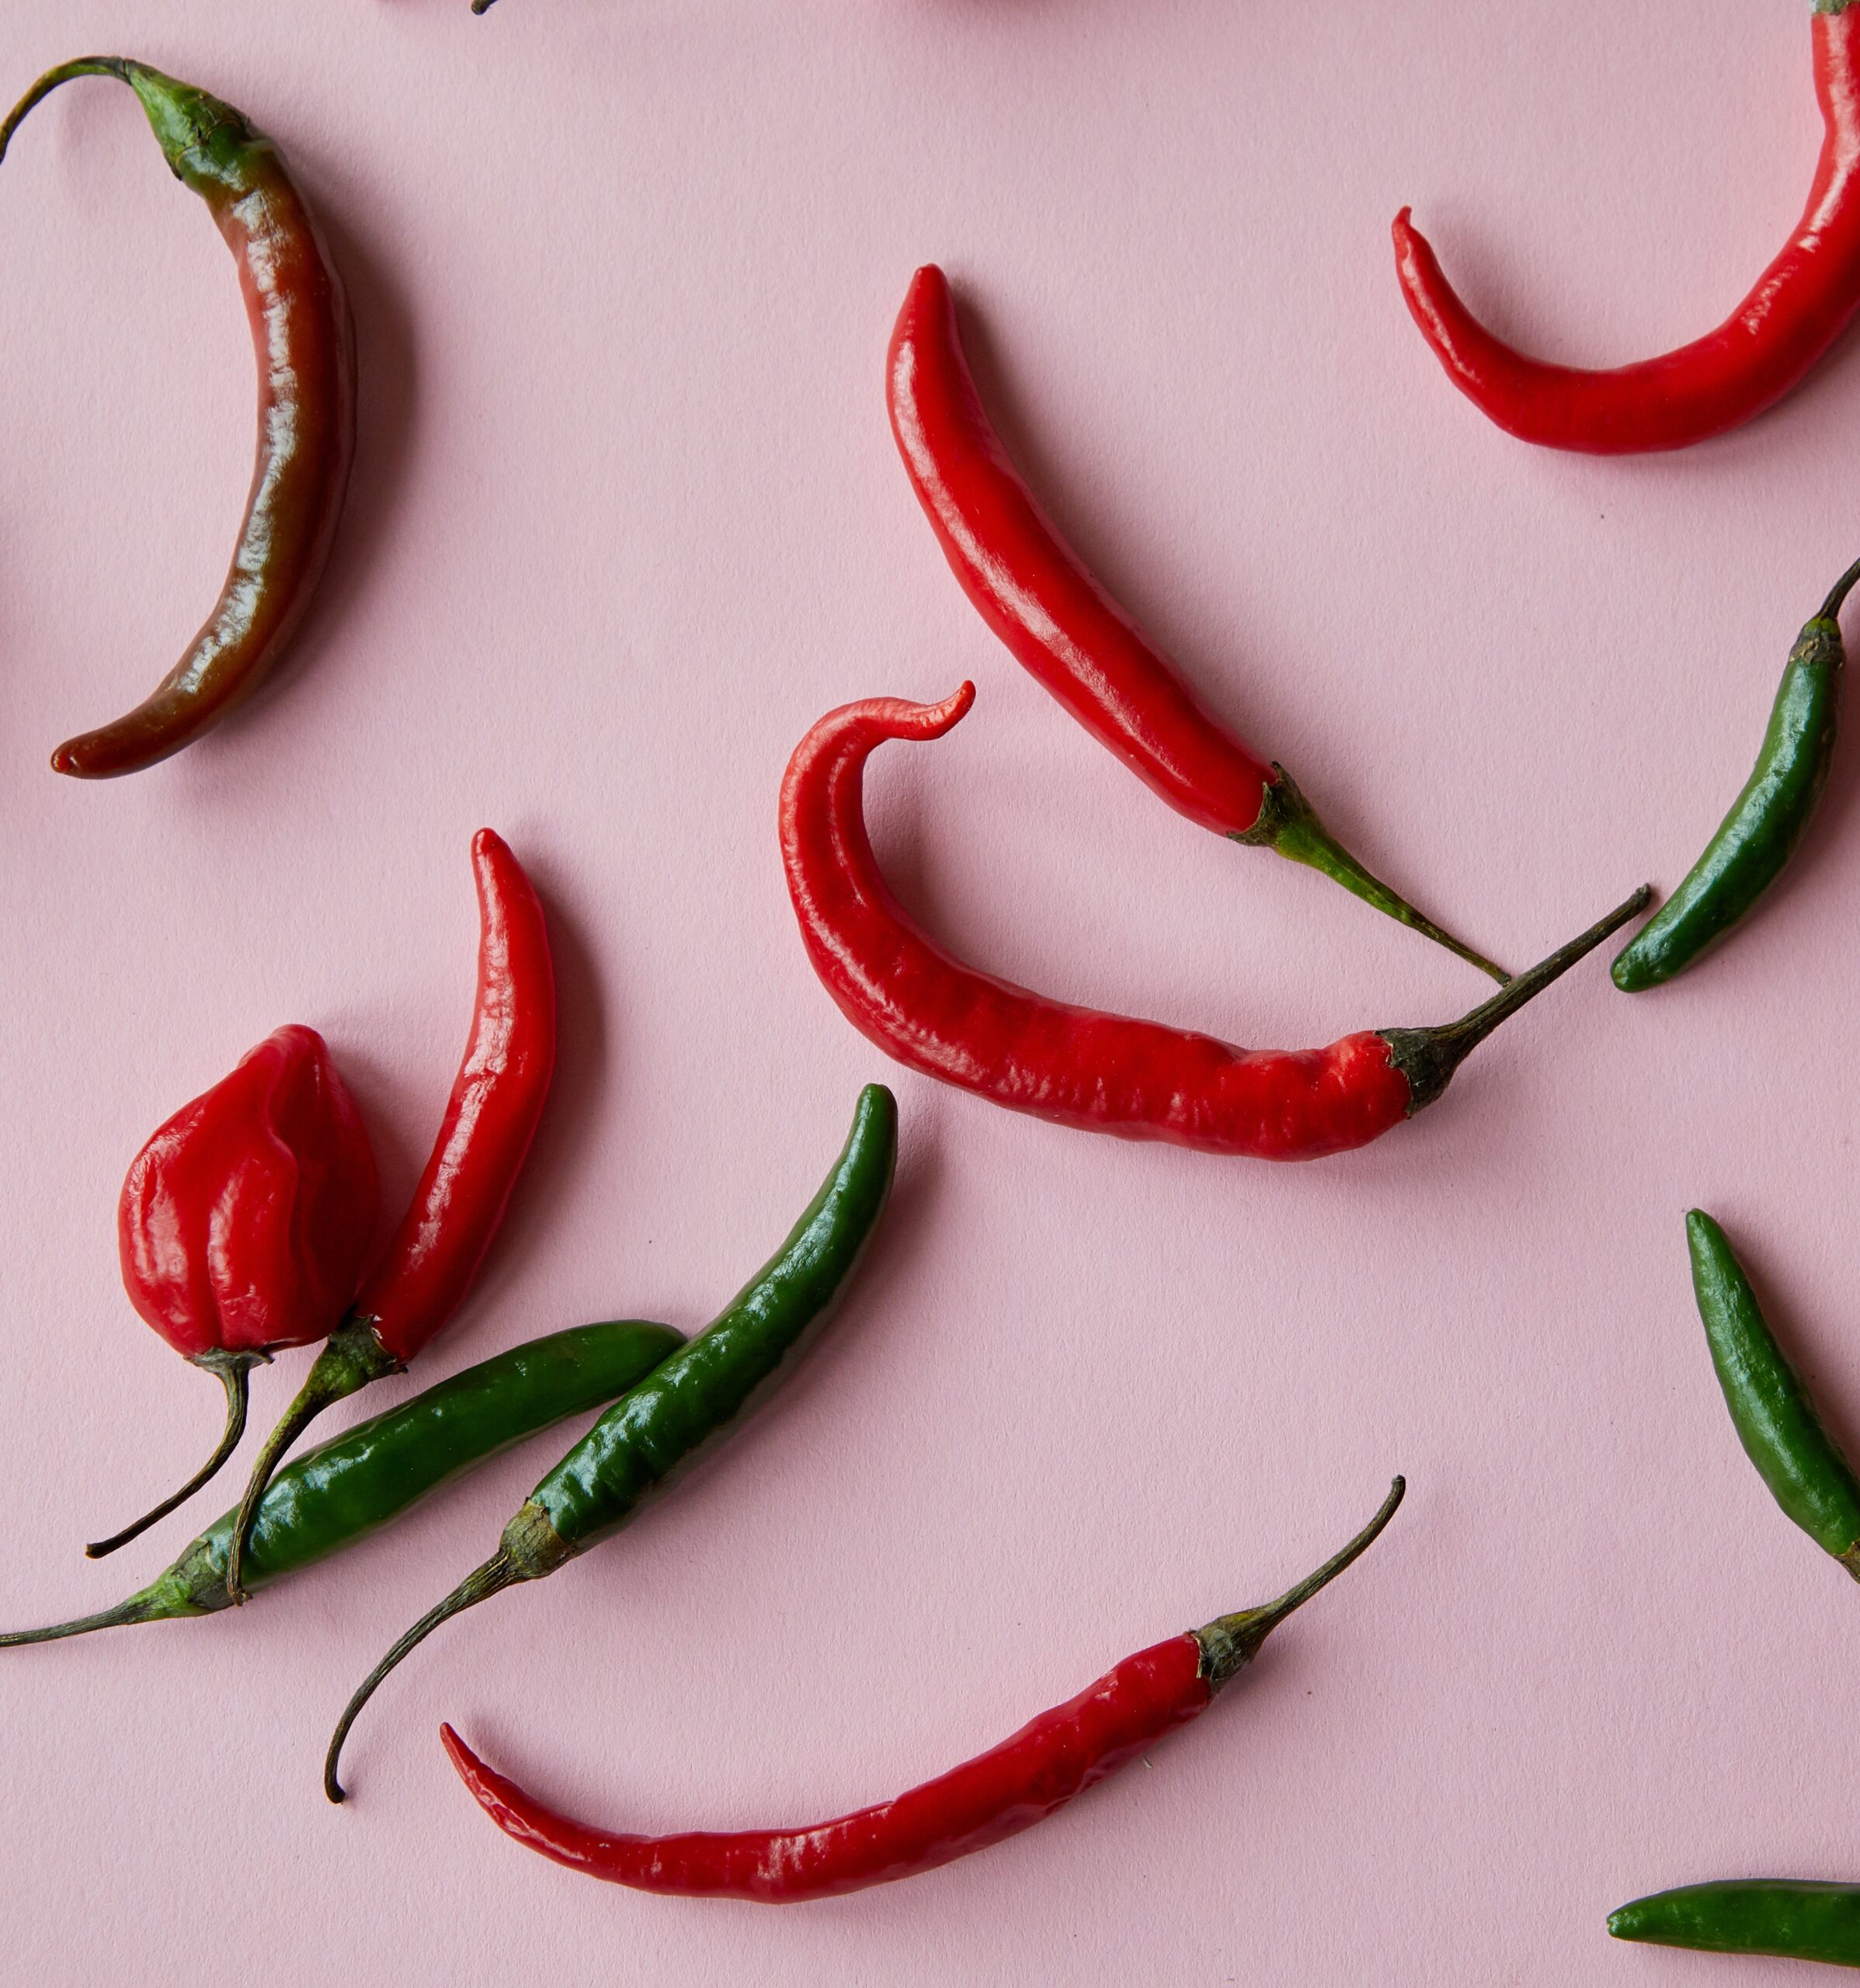 a variety of peppers on a pink background